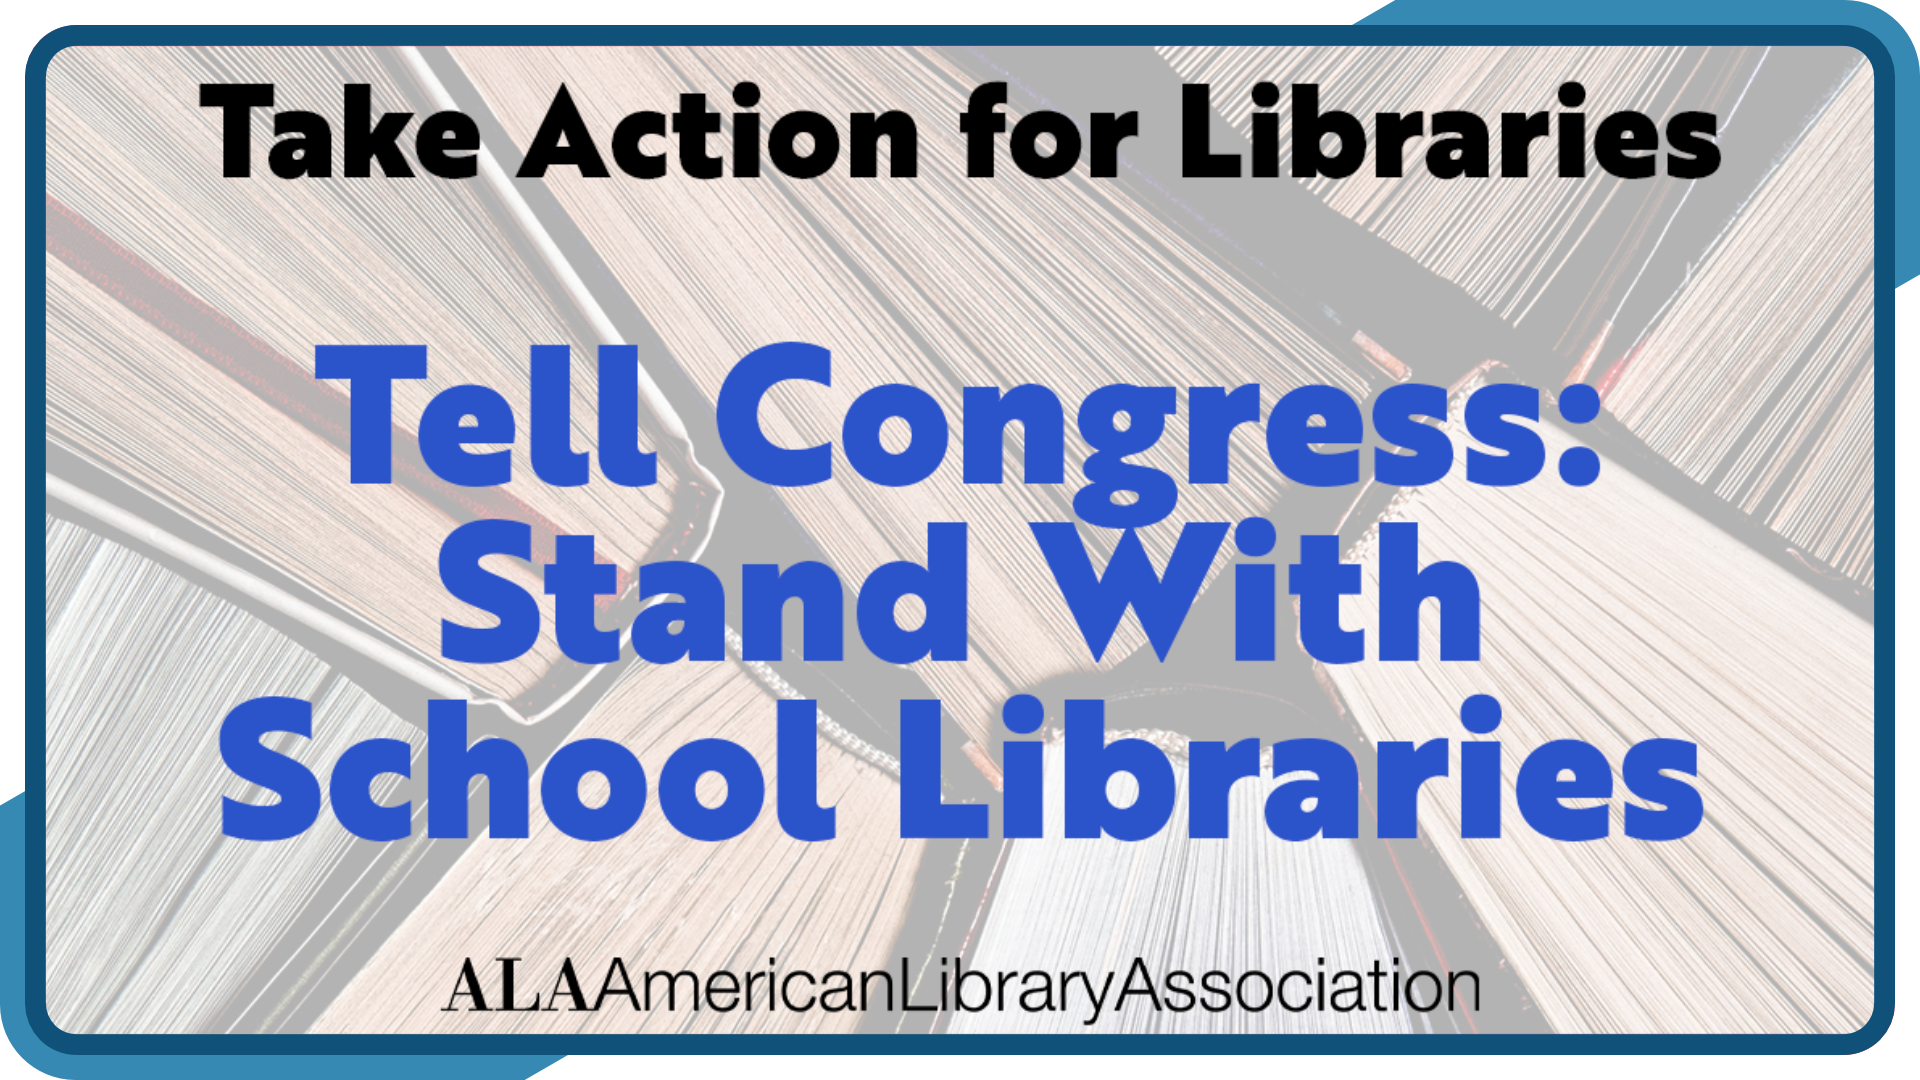 Take Action for Libraries Day is April 27th